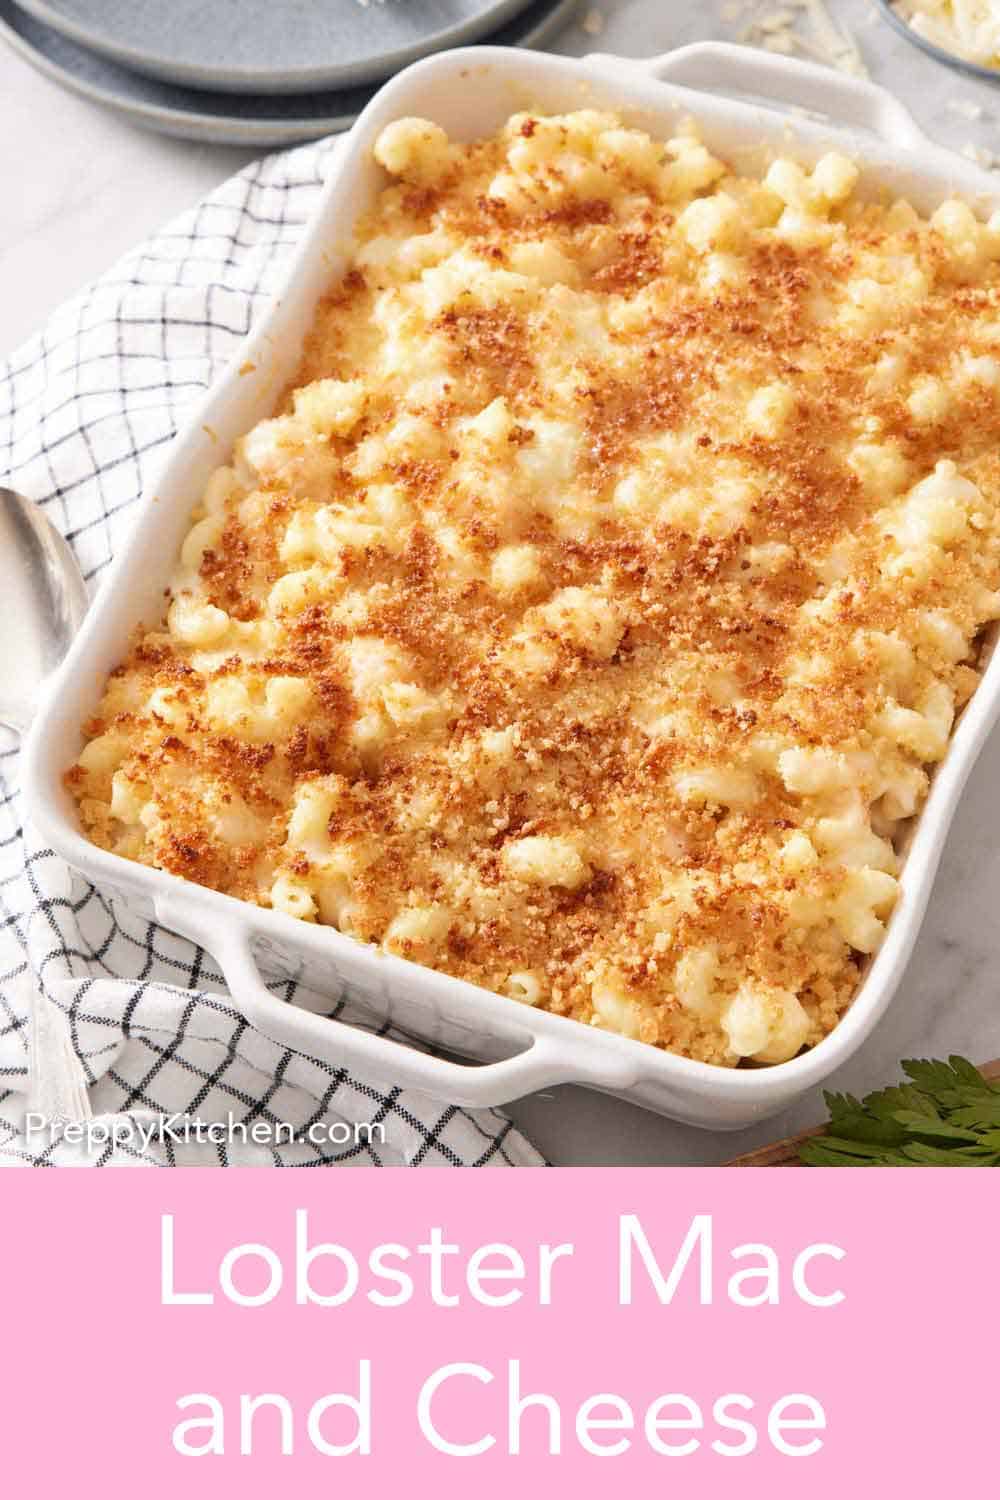 Lobster Mac and Cheese - Preppy Kitchen